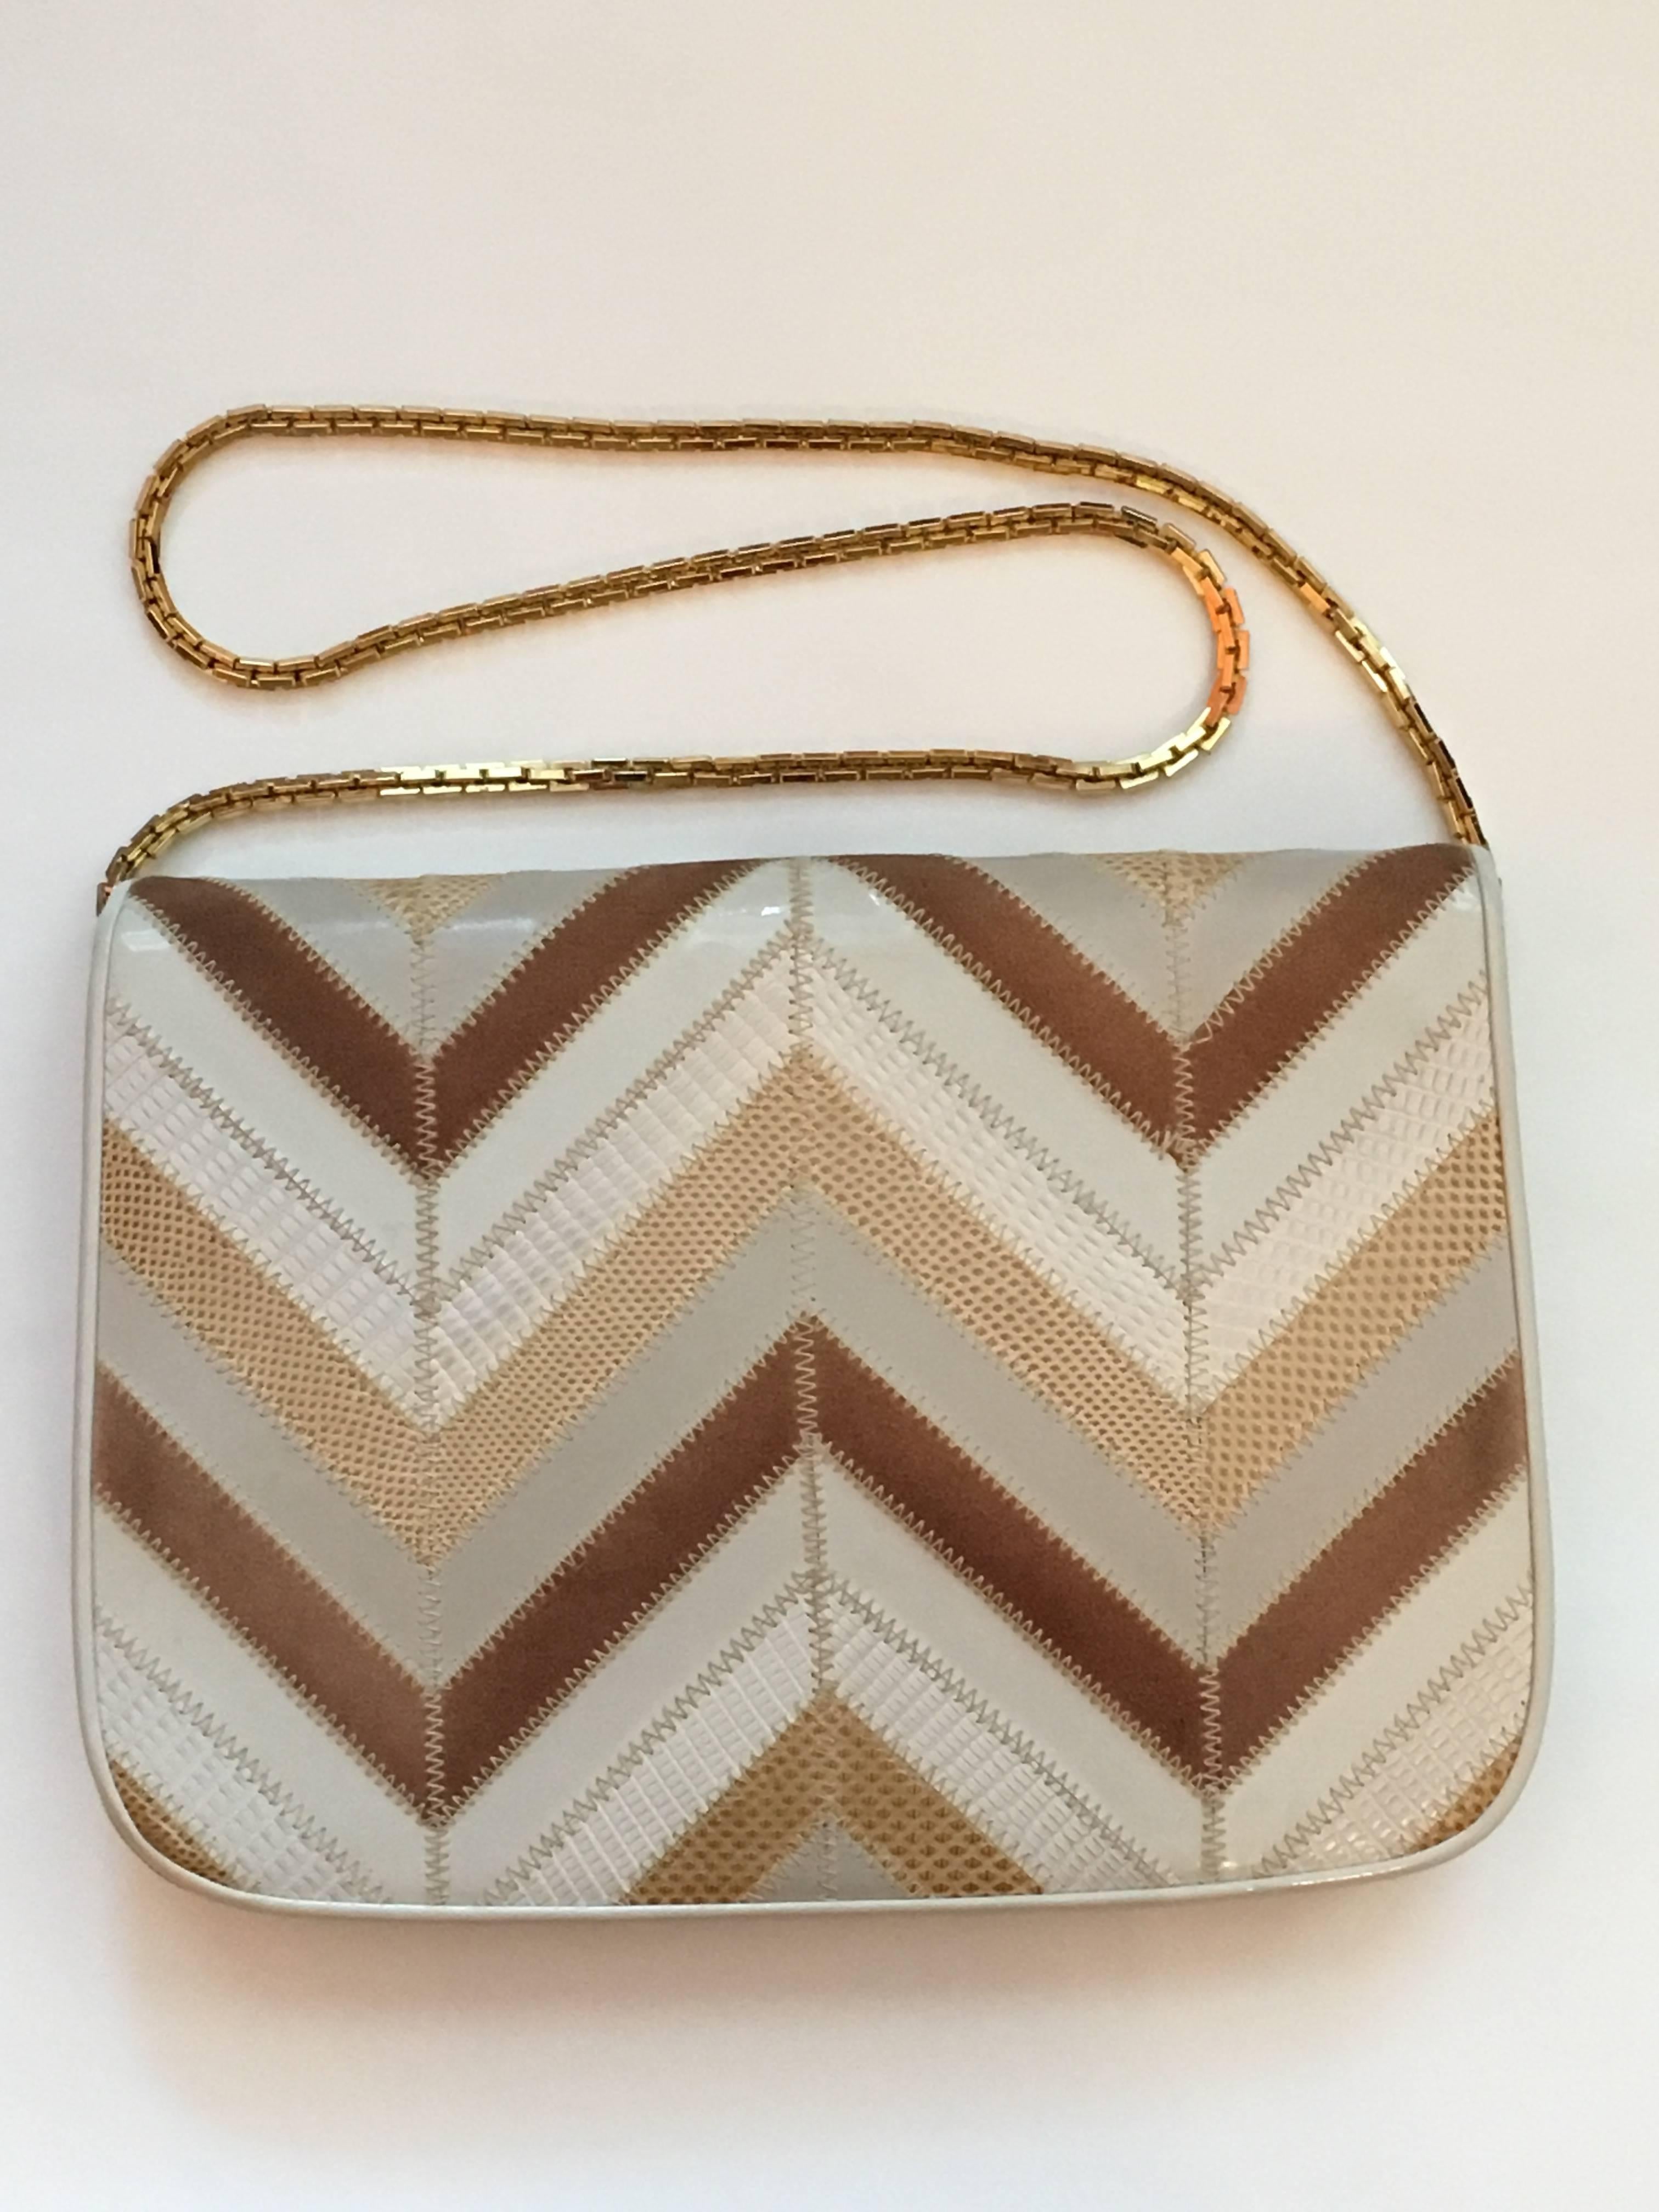 This is a fabulous 1970s Judith Leiber zig zag patchwork clutch made up of snake skins, suede, leather and patent leather. It can be used as a clutch or the removable gold chain can be attached and it can be used as a shoulder bag. It measures 9